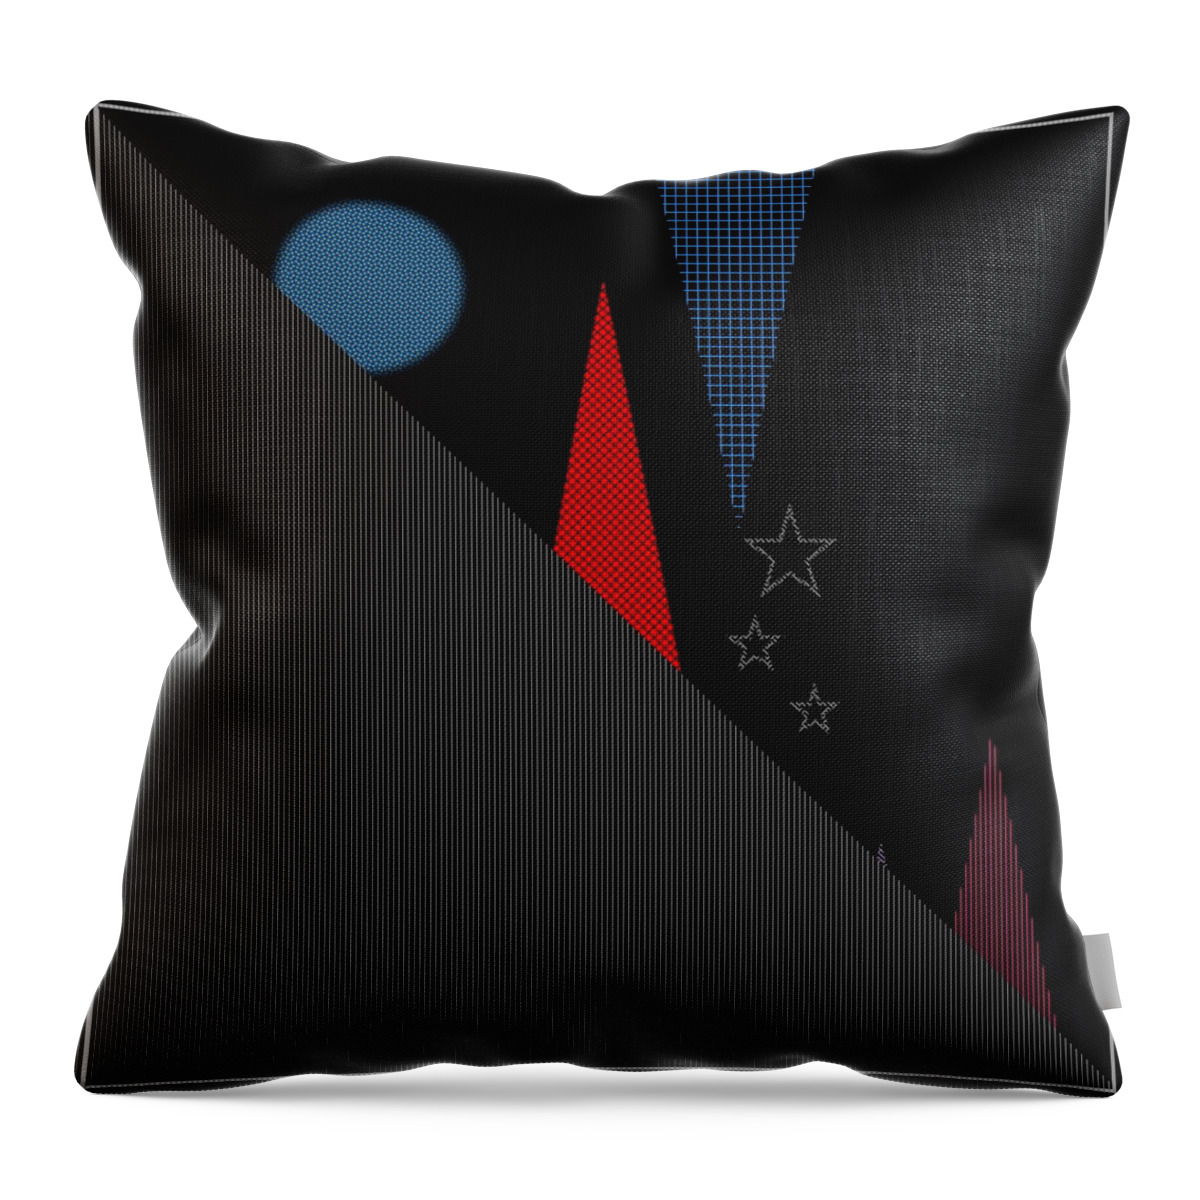 Mountains Throw Pillow featuring the digital art Hidden Shadows by Designs By L